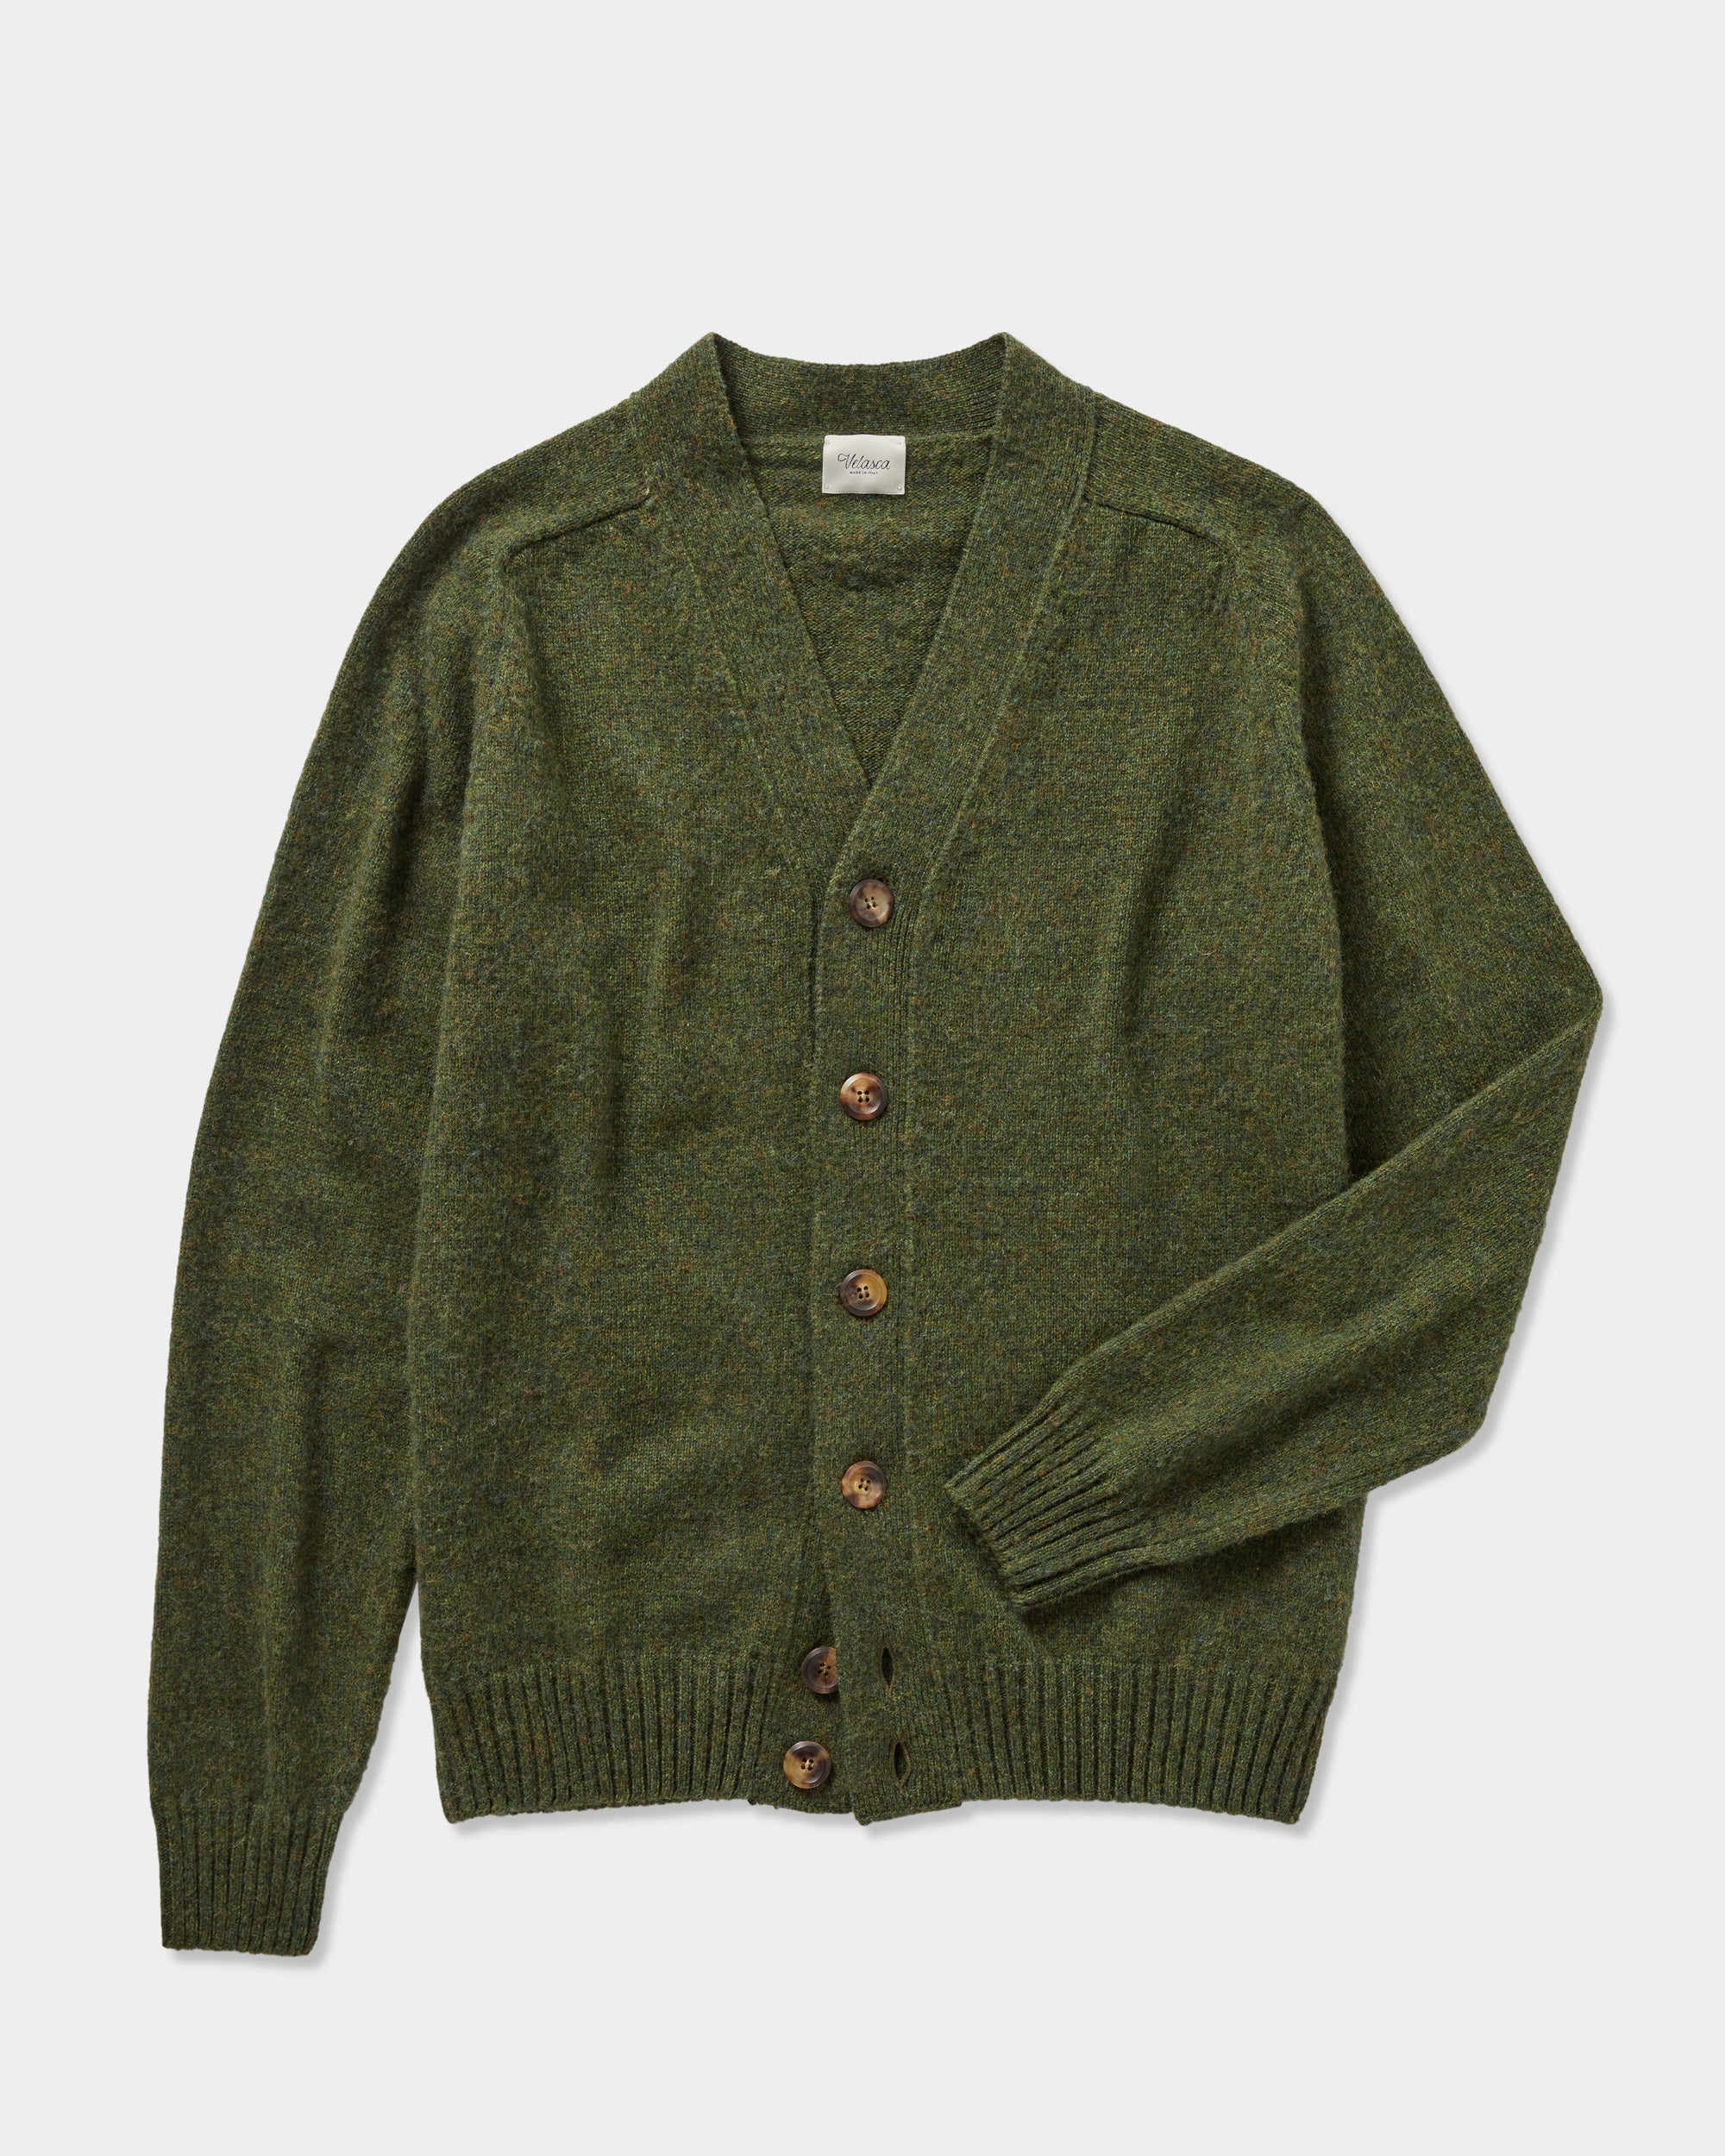 Velasca | Men's cardigan in pure Shetland wool, made in Italy